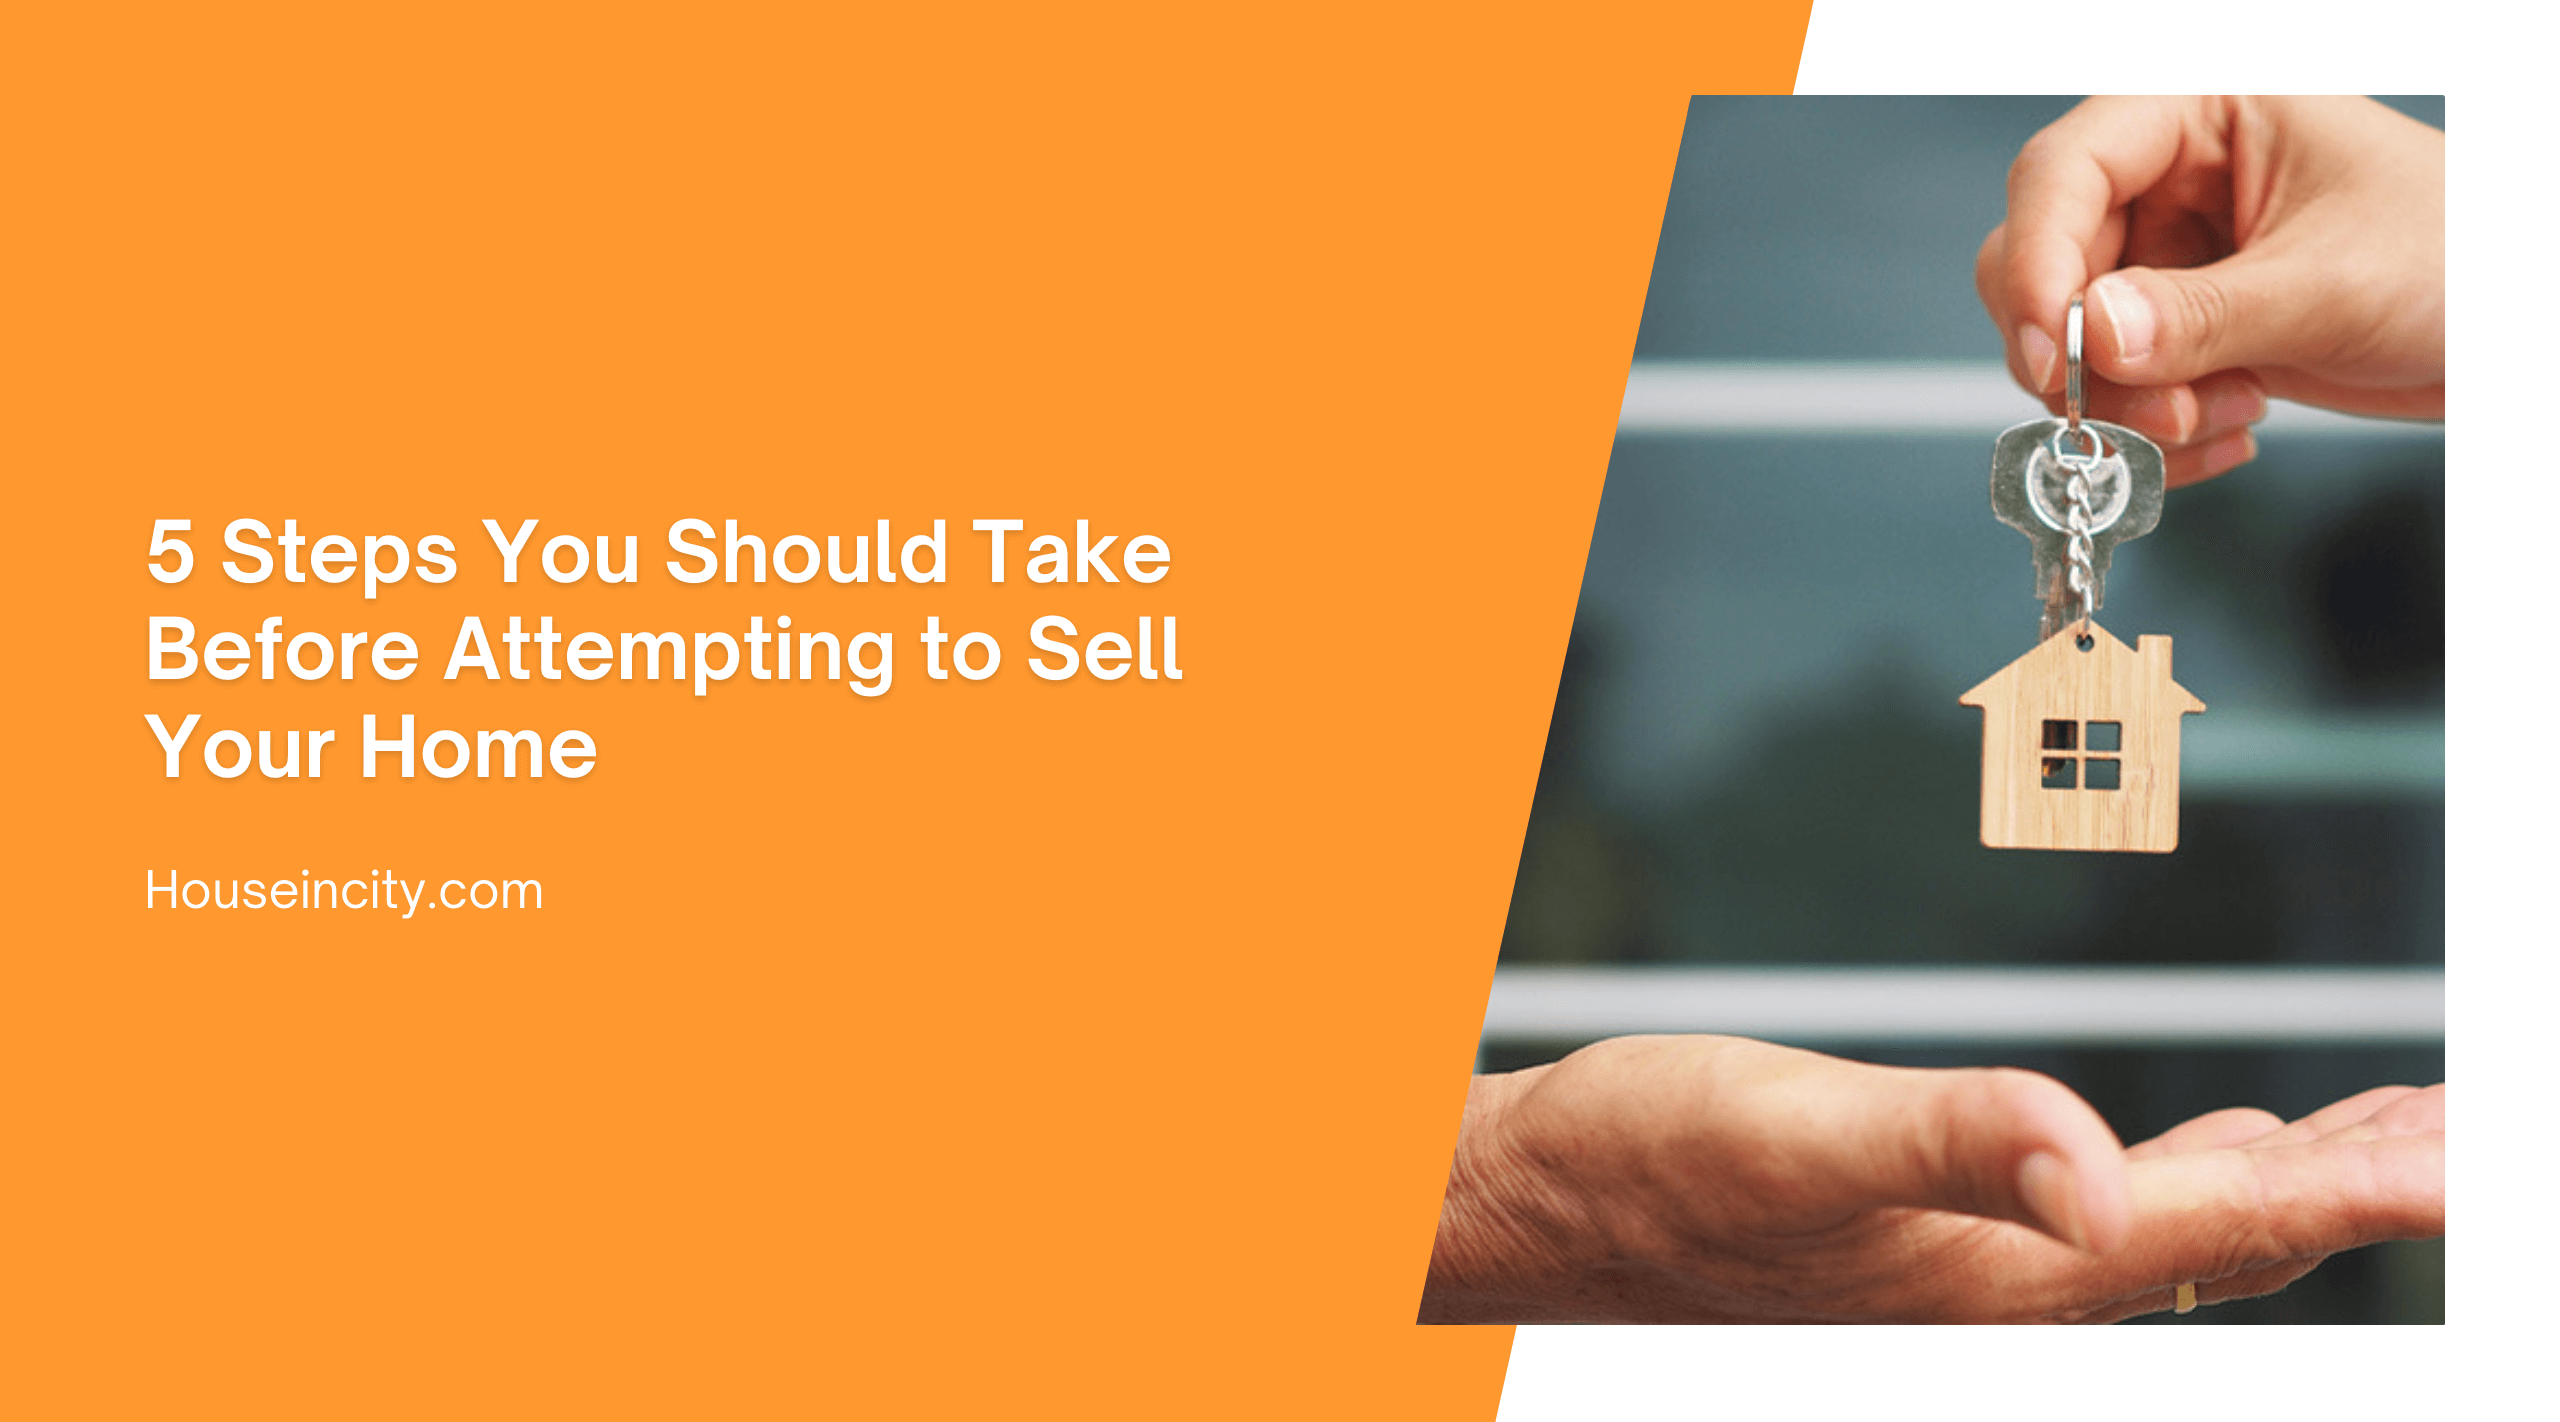 5 Steps You Should Take Before Attempting to Sell Your Home